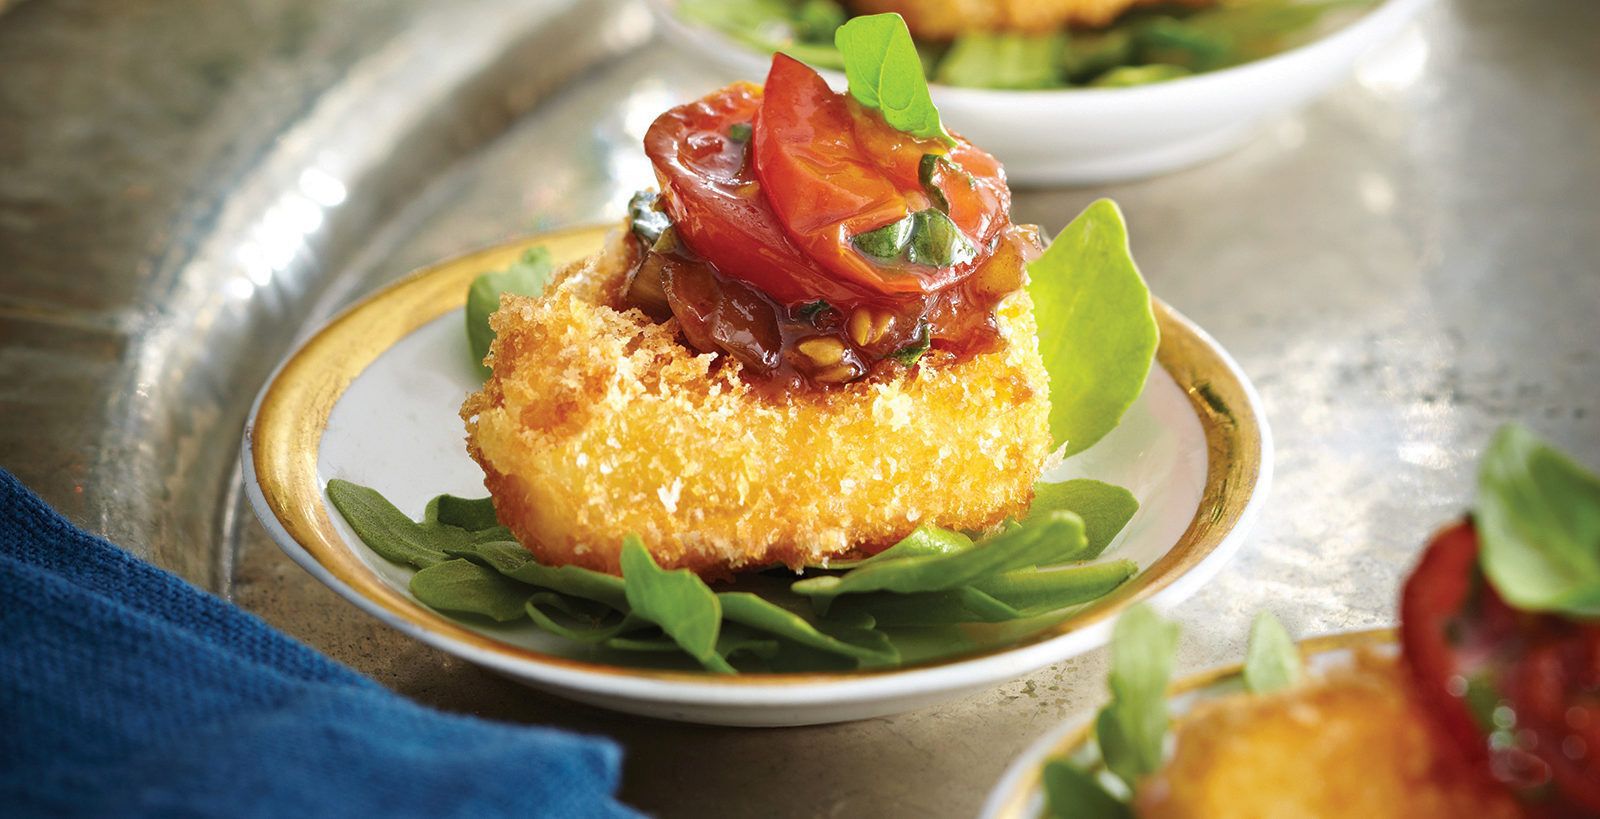 panko-crusted-cheese-with-tomato-basil-confit